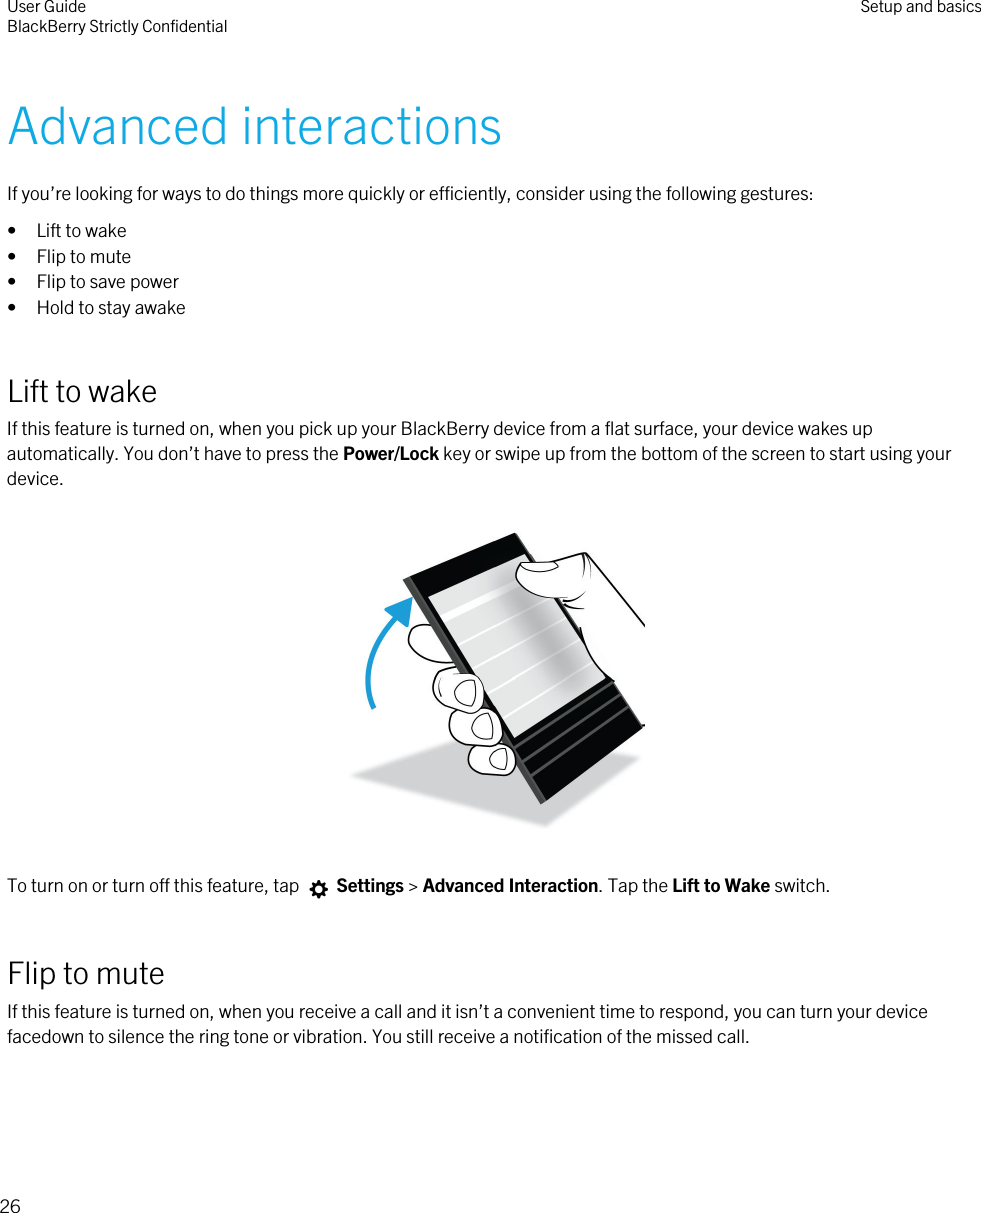 Advanced interactionsIf you’re looking for ways to do things more quickly or efficiently, consider using the following gestures:• Lift to wake• Flip to mute• Flip to save power• Hold to stay awakeLift to wakeIf this feature is turned on, when you pick up your BlackBerry device from a flat surface, your device wakes up automatically. You don’t have to press the Power/Lock key or swipe up from the bottom of the screen to start using your device.  To turn on or turn off this feature, tap   Settings &gt; Advanced Interaction. Tap the Lift to Wake switch.Flip to muteIf this feature is turned on, when you receive a call and it isn’t a convenient time to respond, you can turn your device facedown to silence the ring tone or vibration. You still receive a notification of the missed call. User GuideBlackBerry Strictly Confidential Setup and basics26